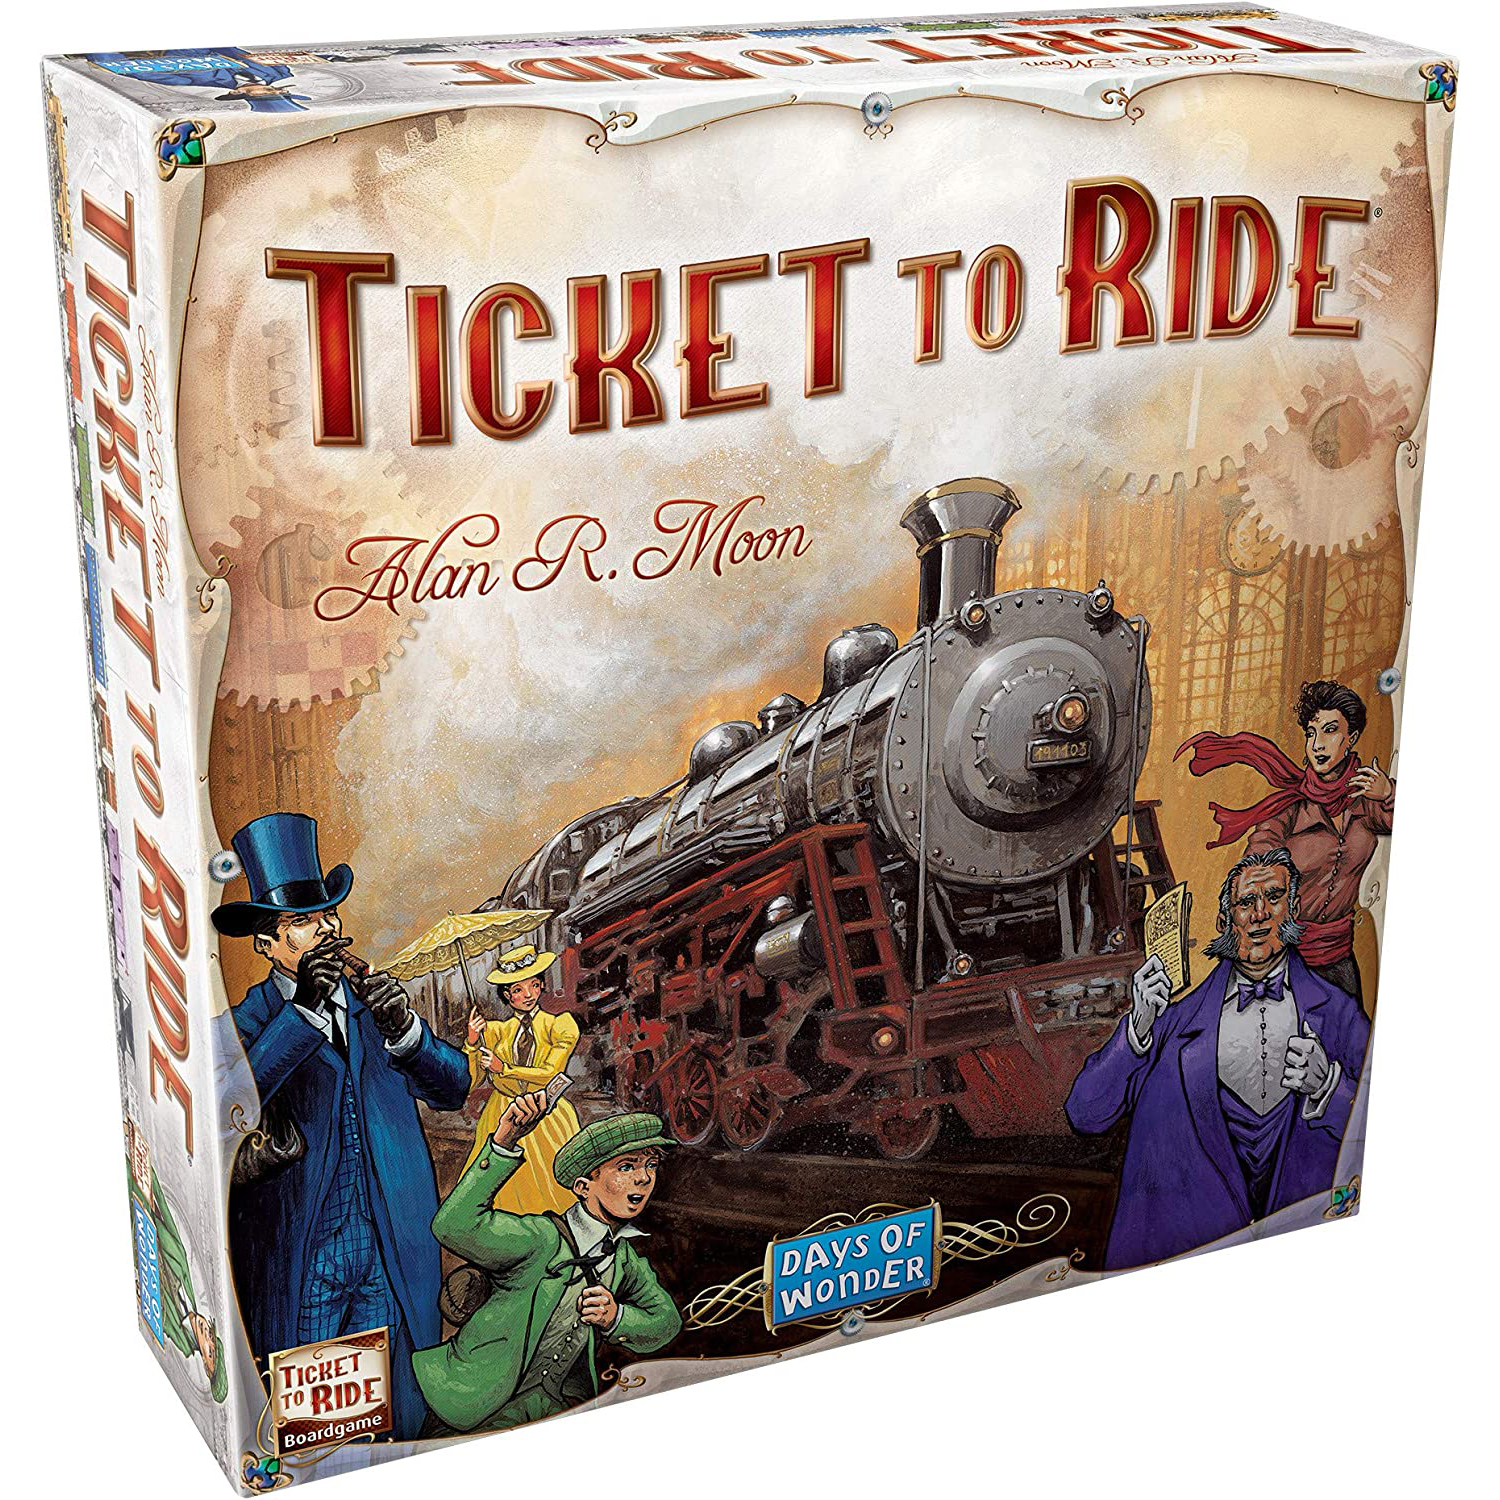 Ticket to ride steam фото 52